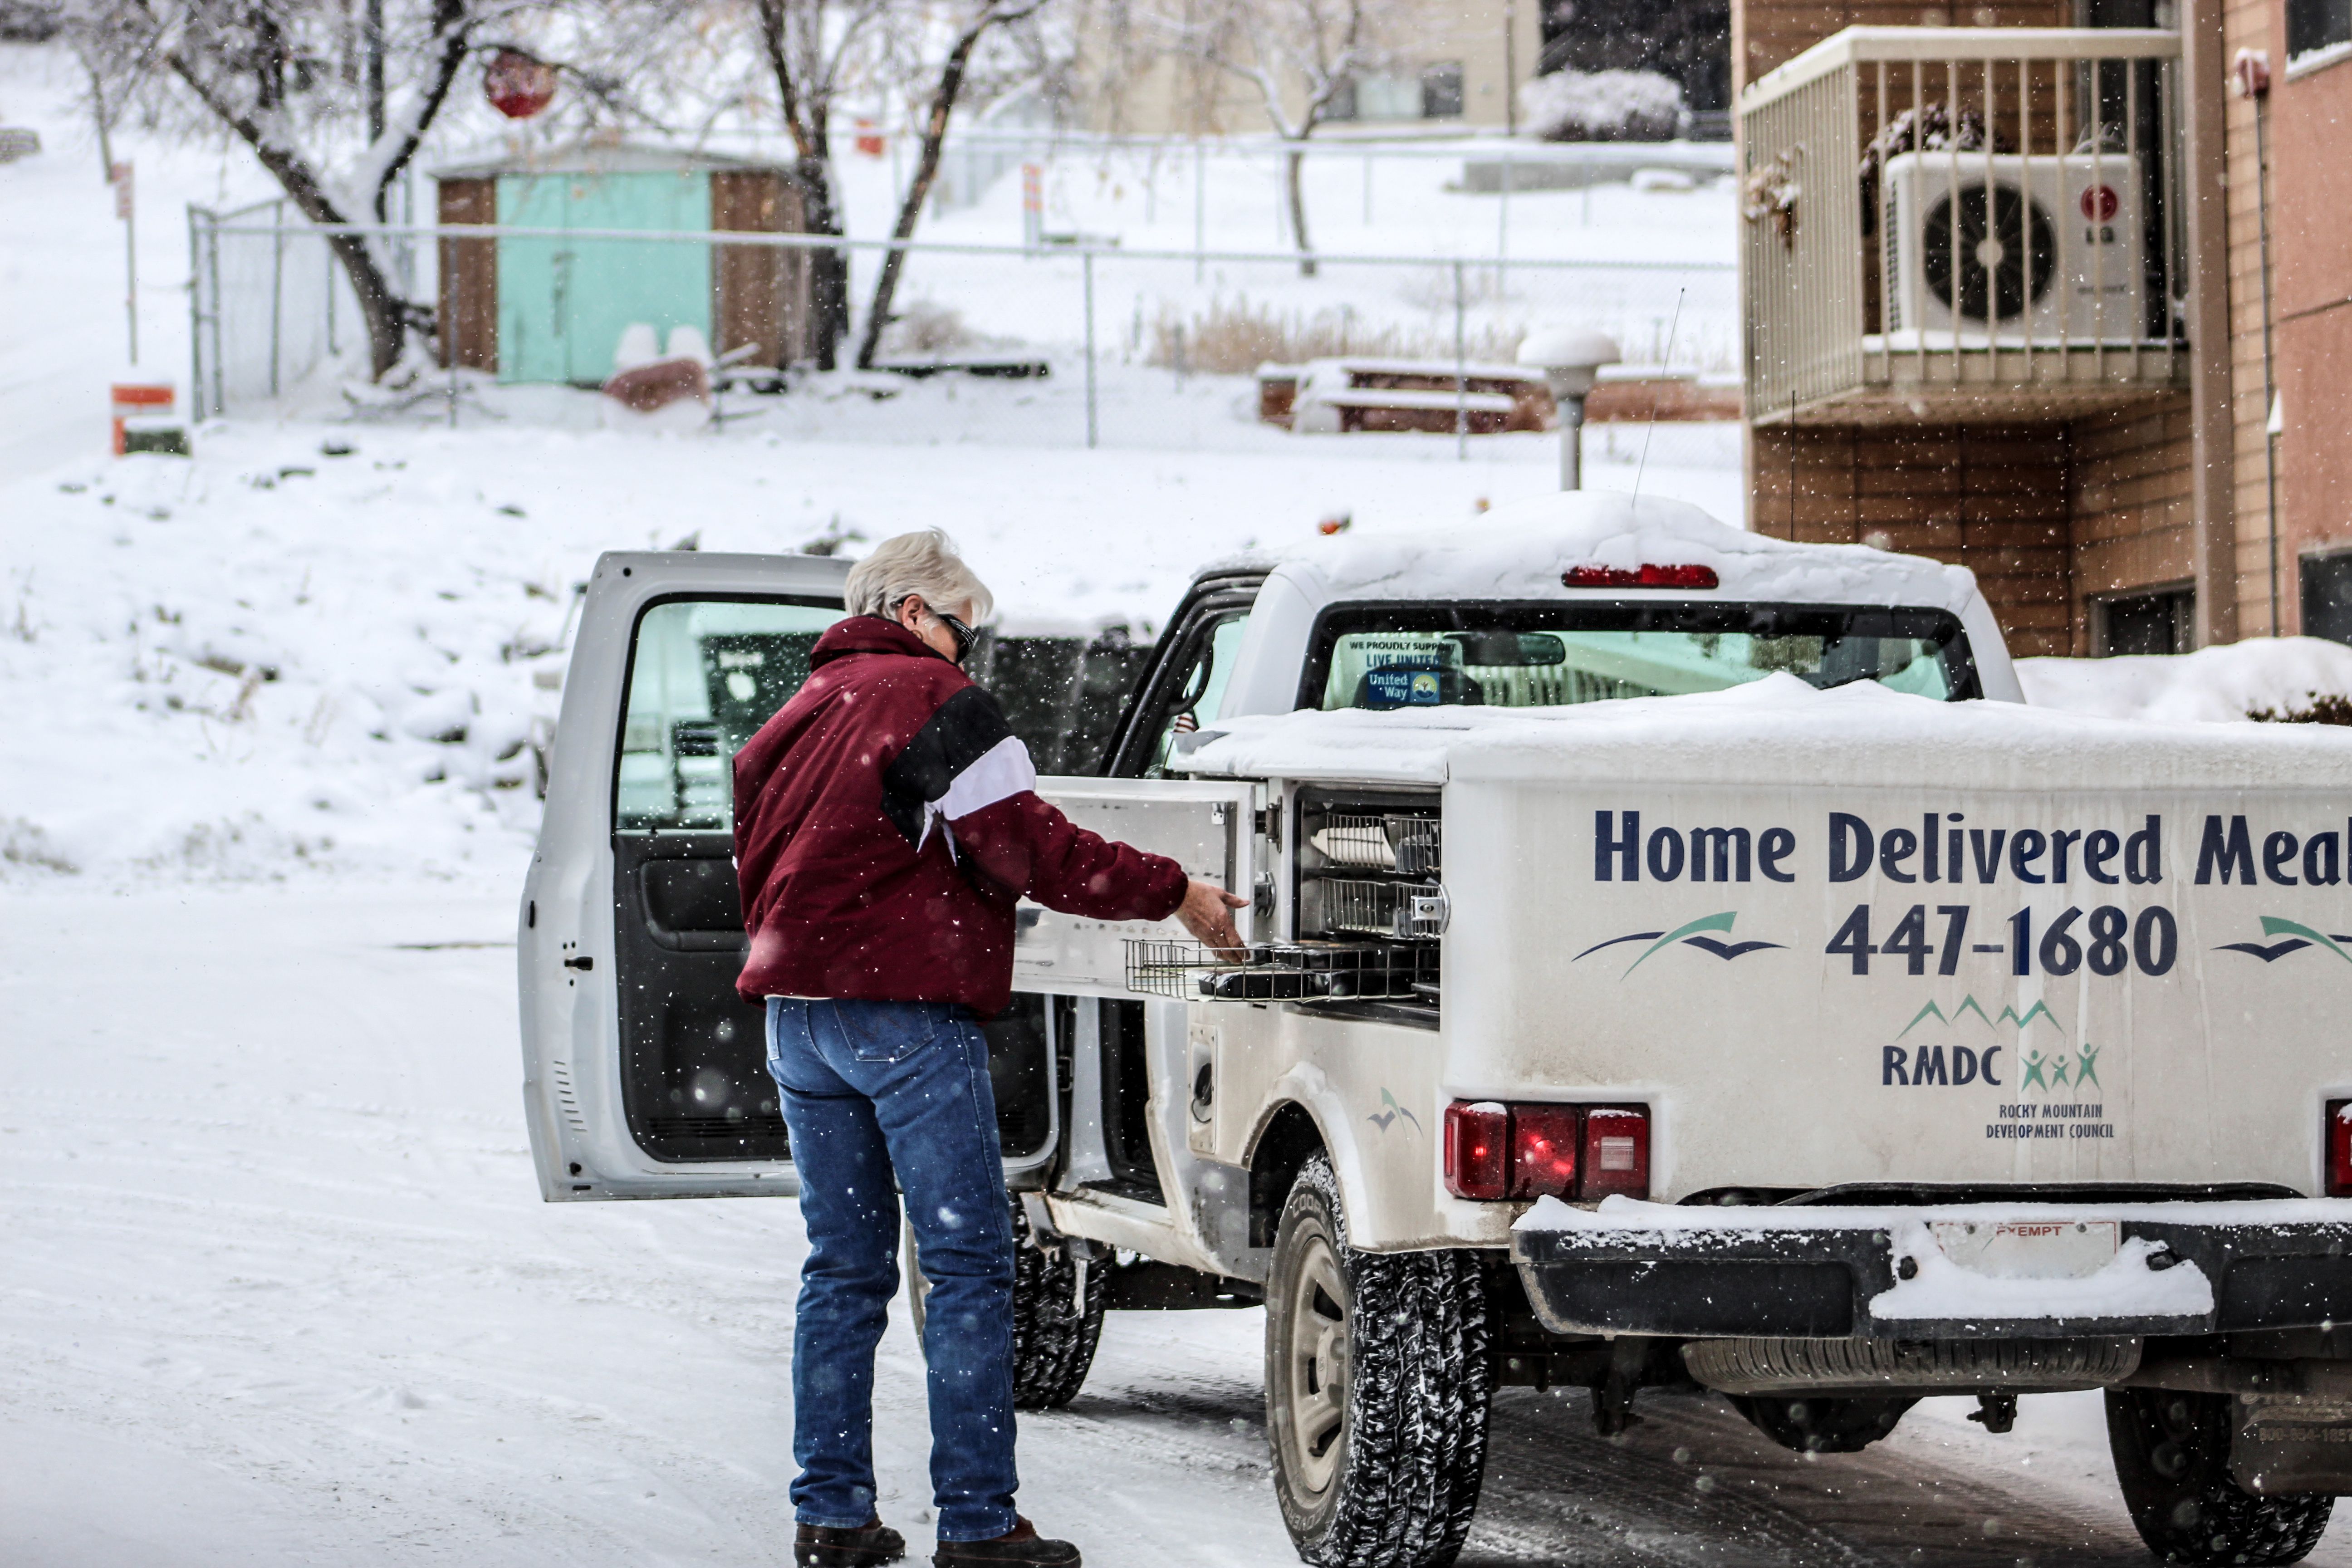 Pictured: Meals on Wheels driver, Duzzy, delivering meals on a snowy, winter day. 